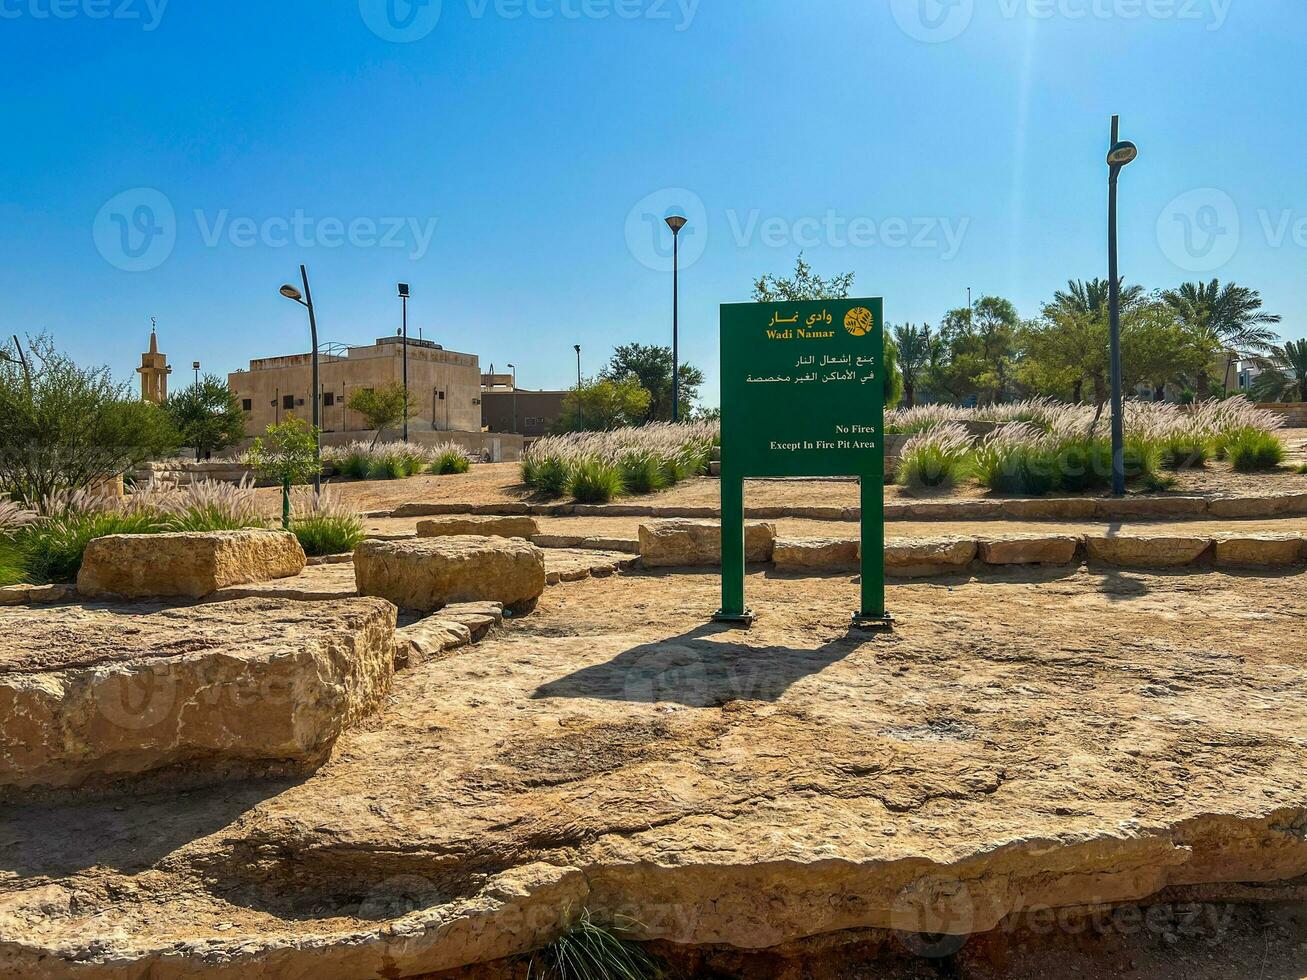 Public barbecue place  in a Wadi namar park riyadh . The stone block allows people to grill food outdoors. Fire place for a BBQ party. photo